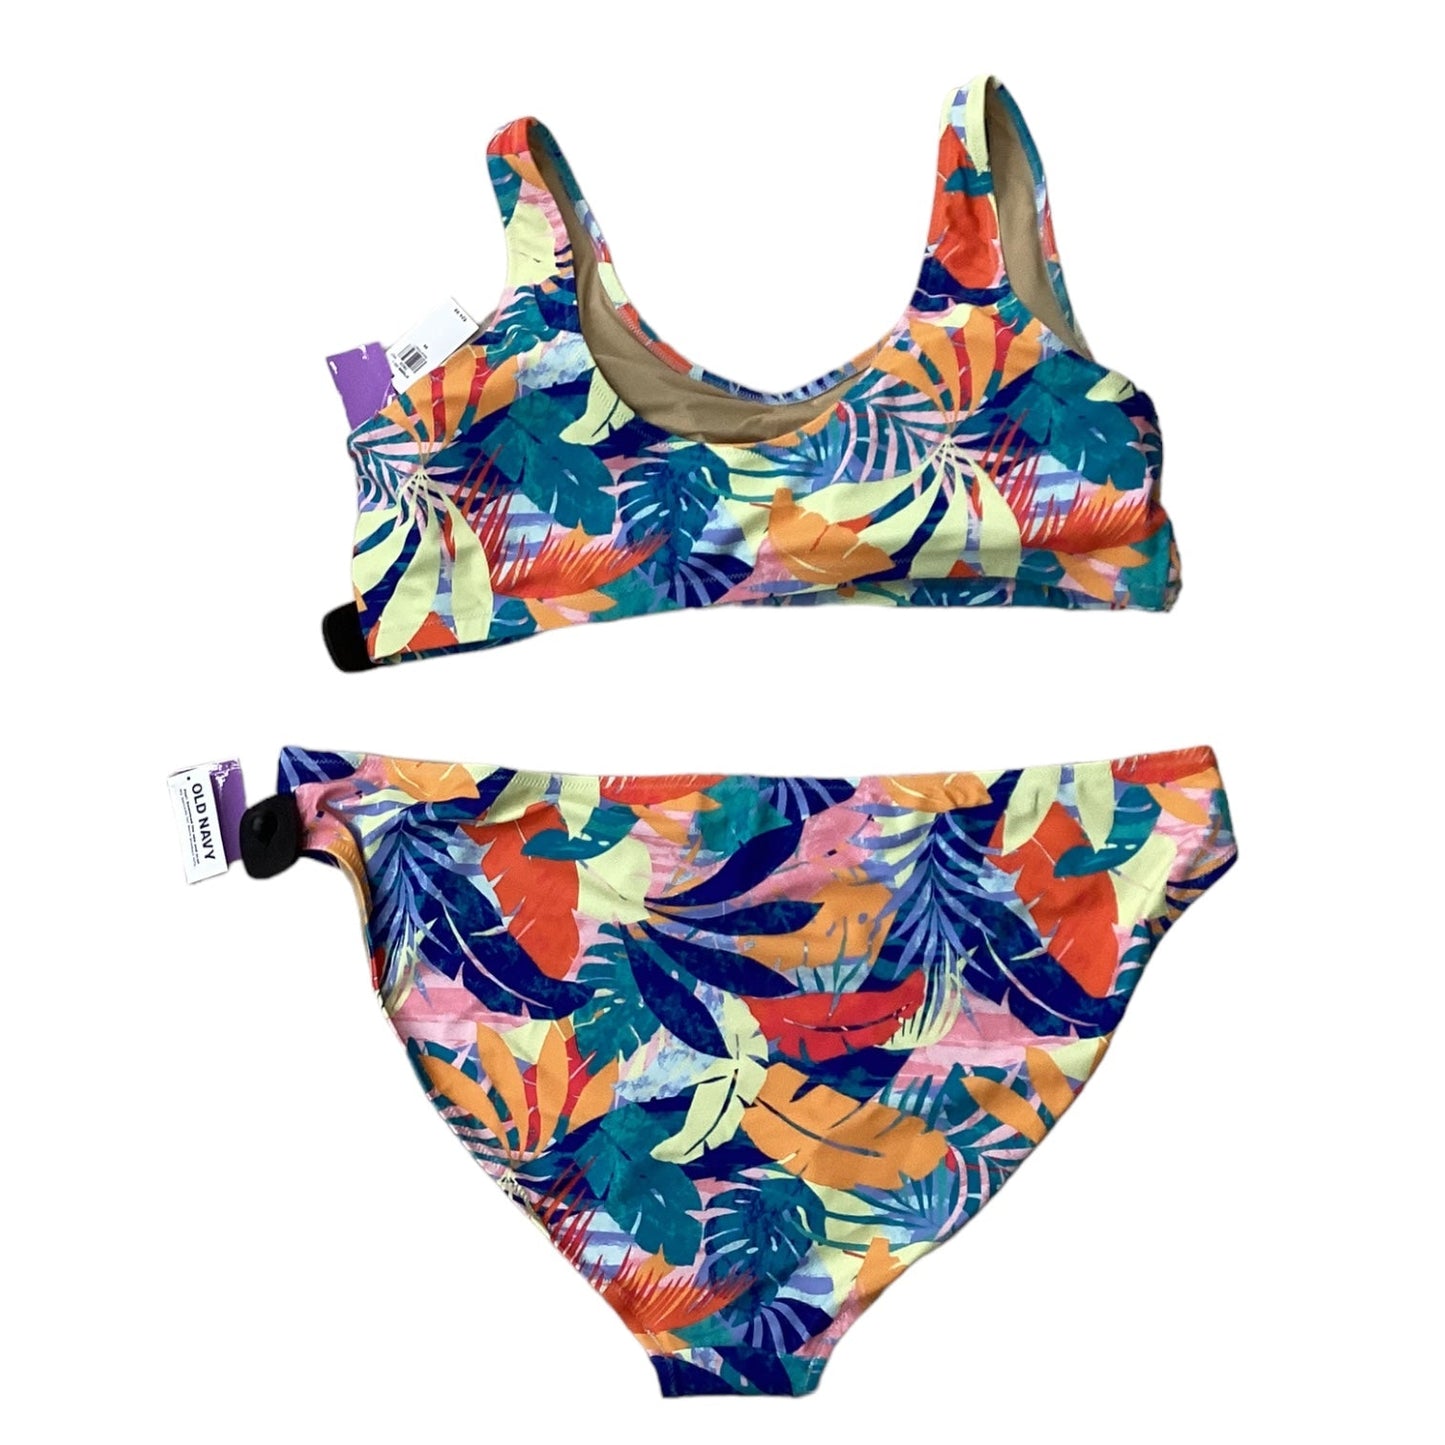 Floral Print Swimsuit 2pc Old Navy, Size 3x